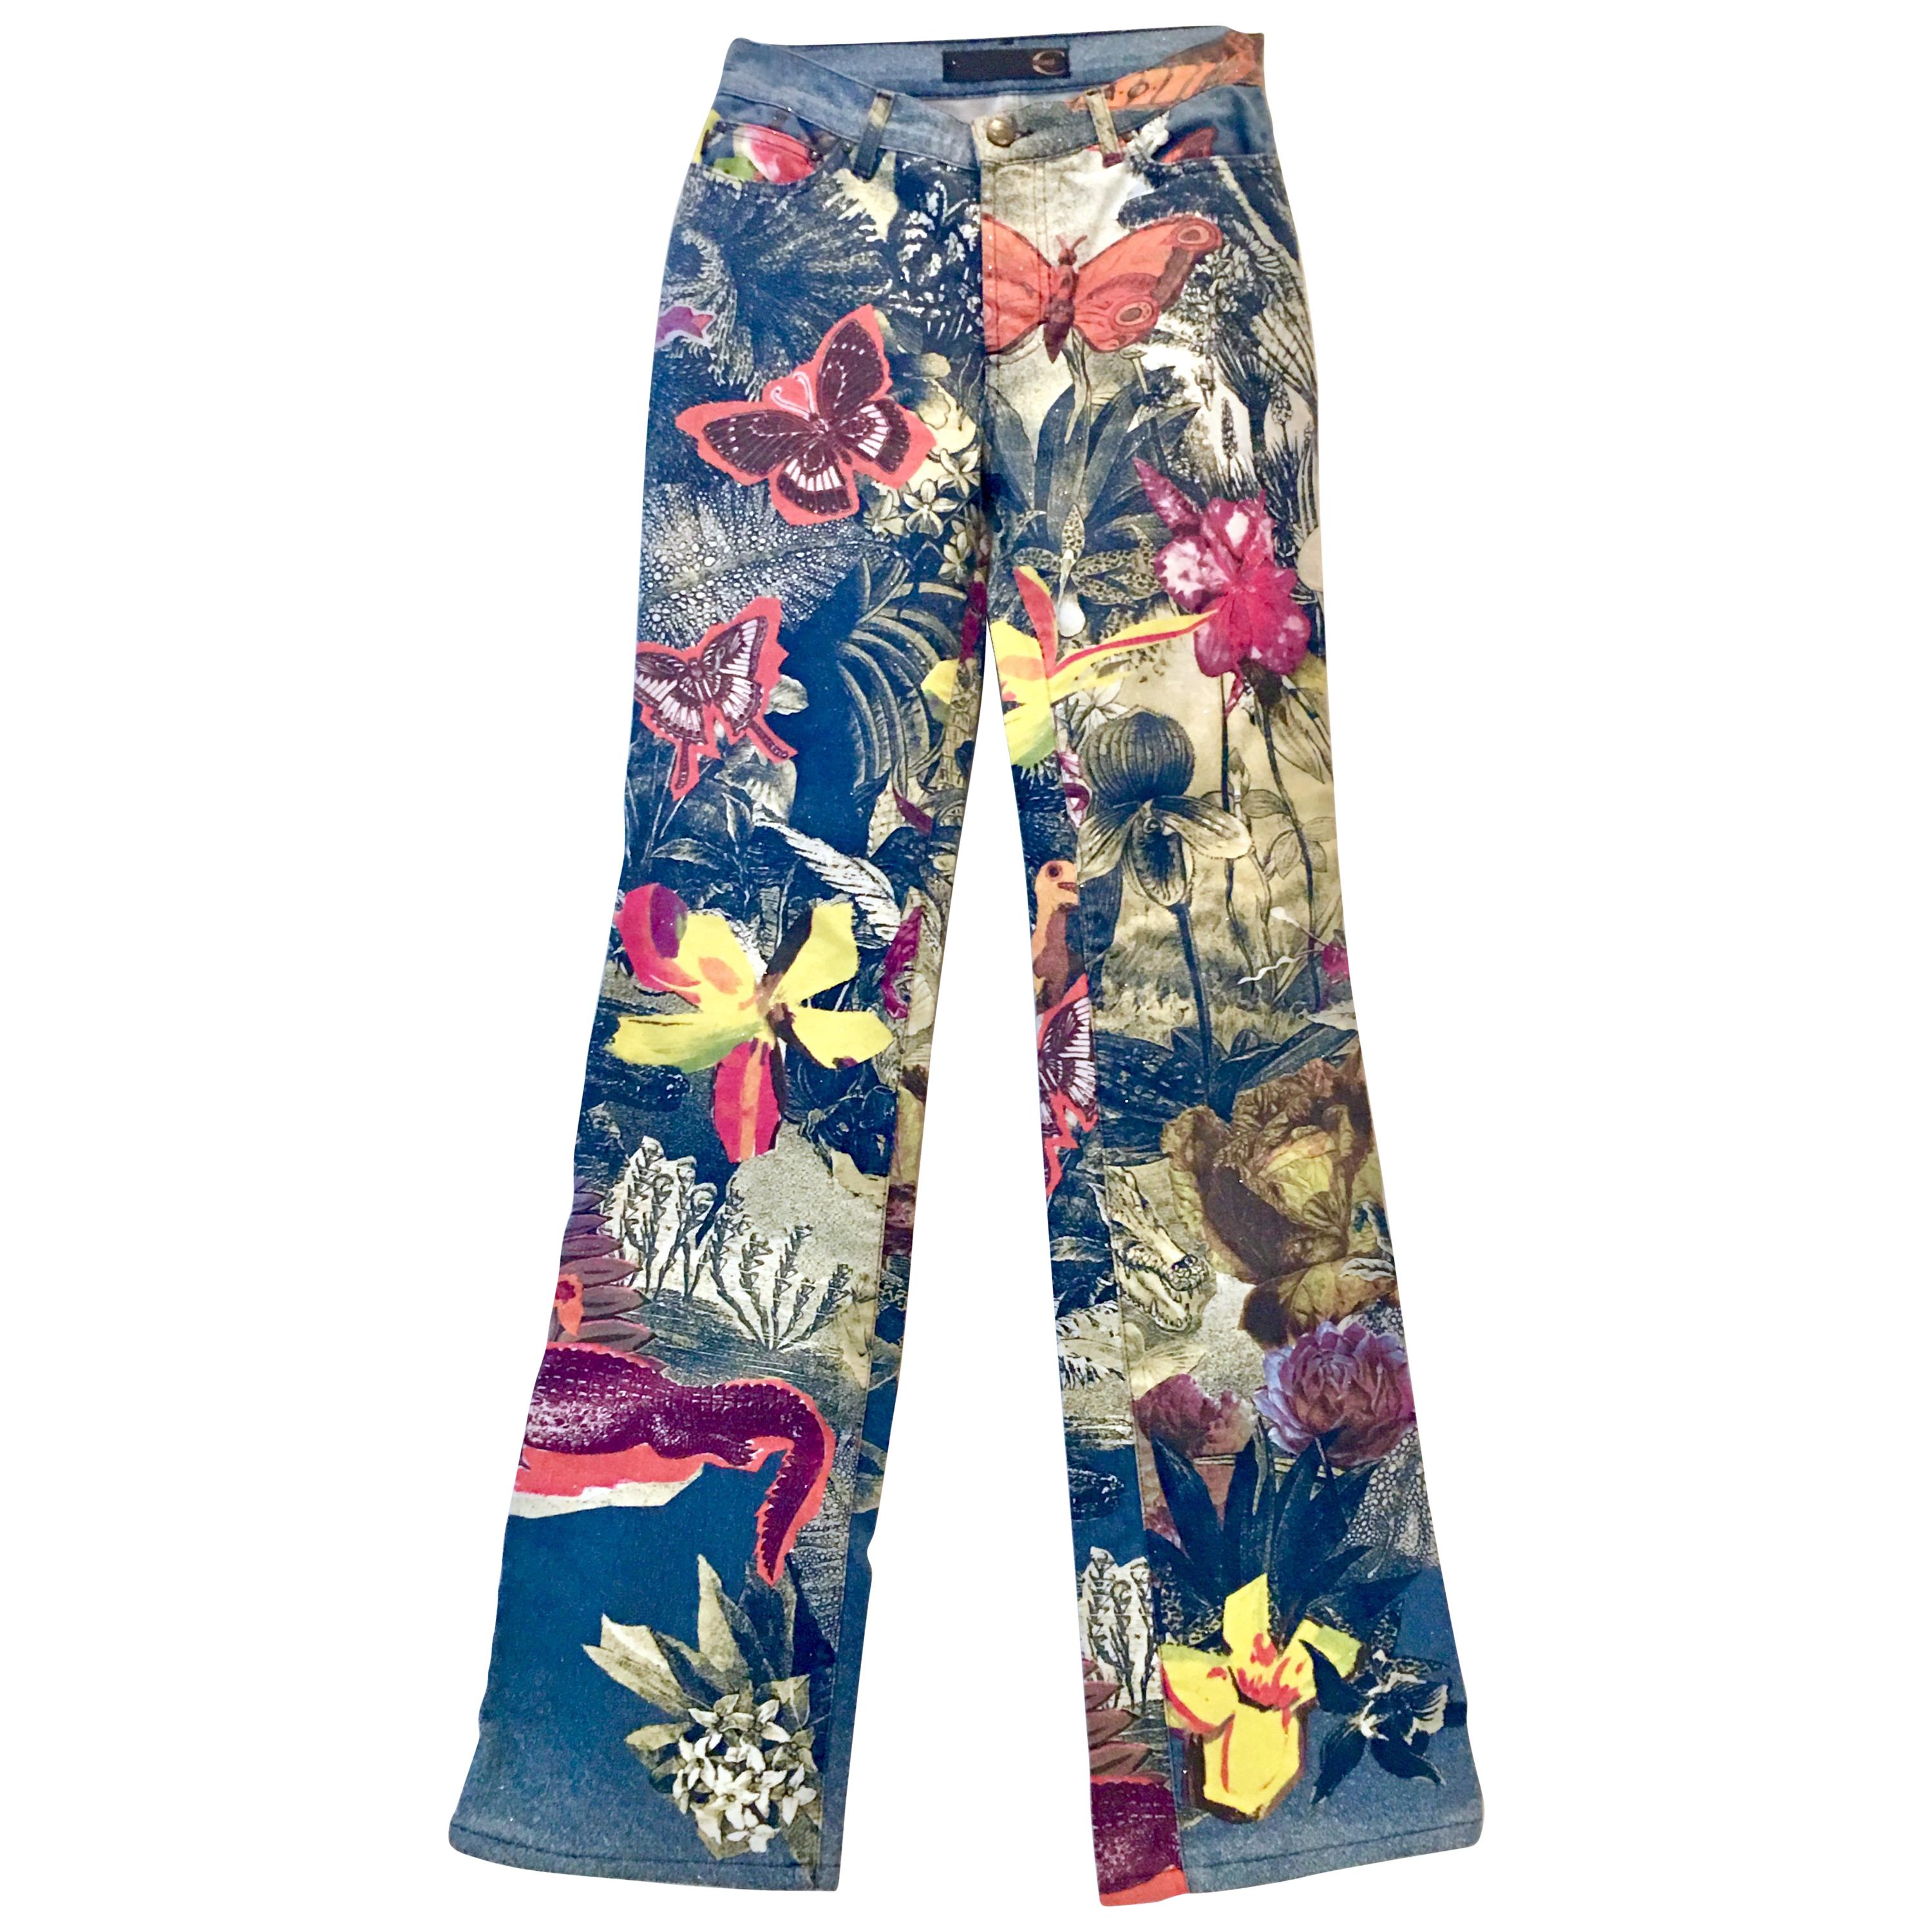 21st Century Crystal Coated "Butterfly" Denim Jeans By, Roberto Cavalli